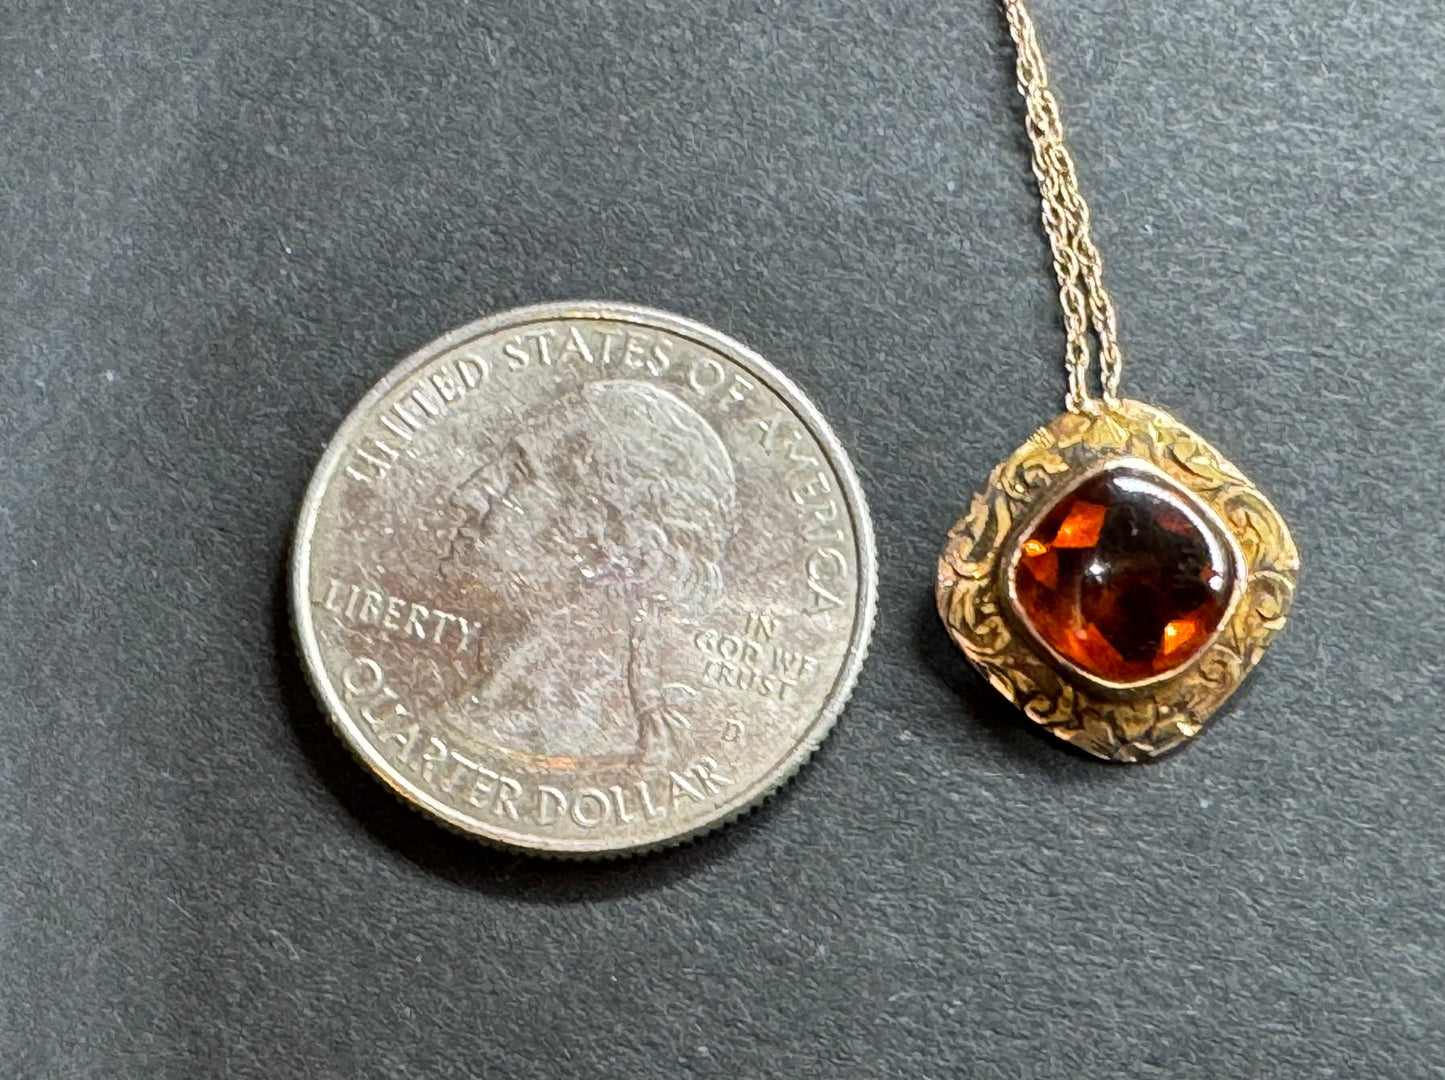 14k Arts & Crafts Engraved Citrine Pendant and Chain